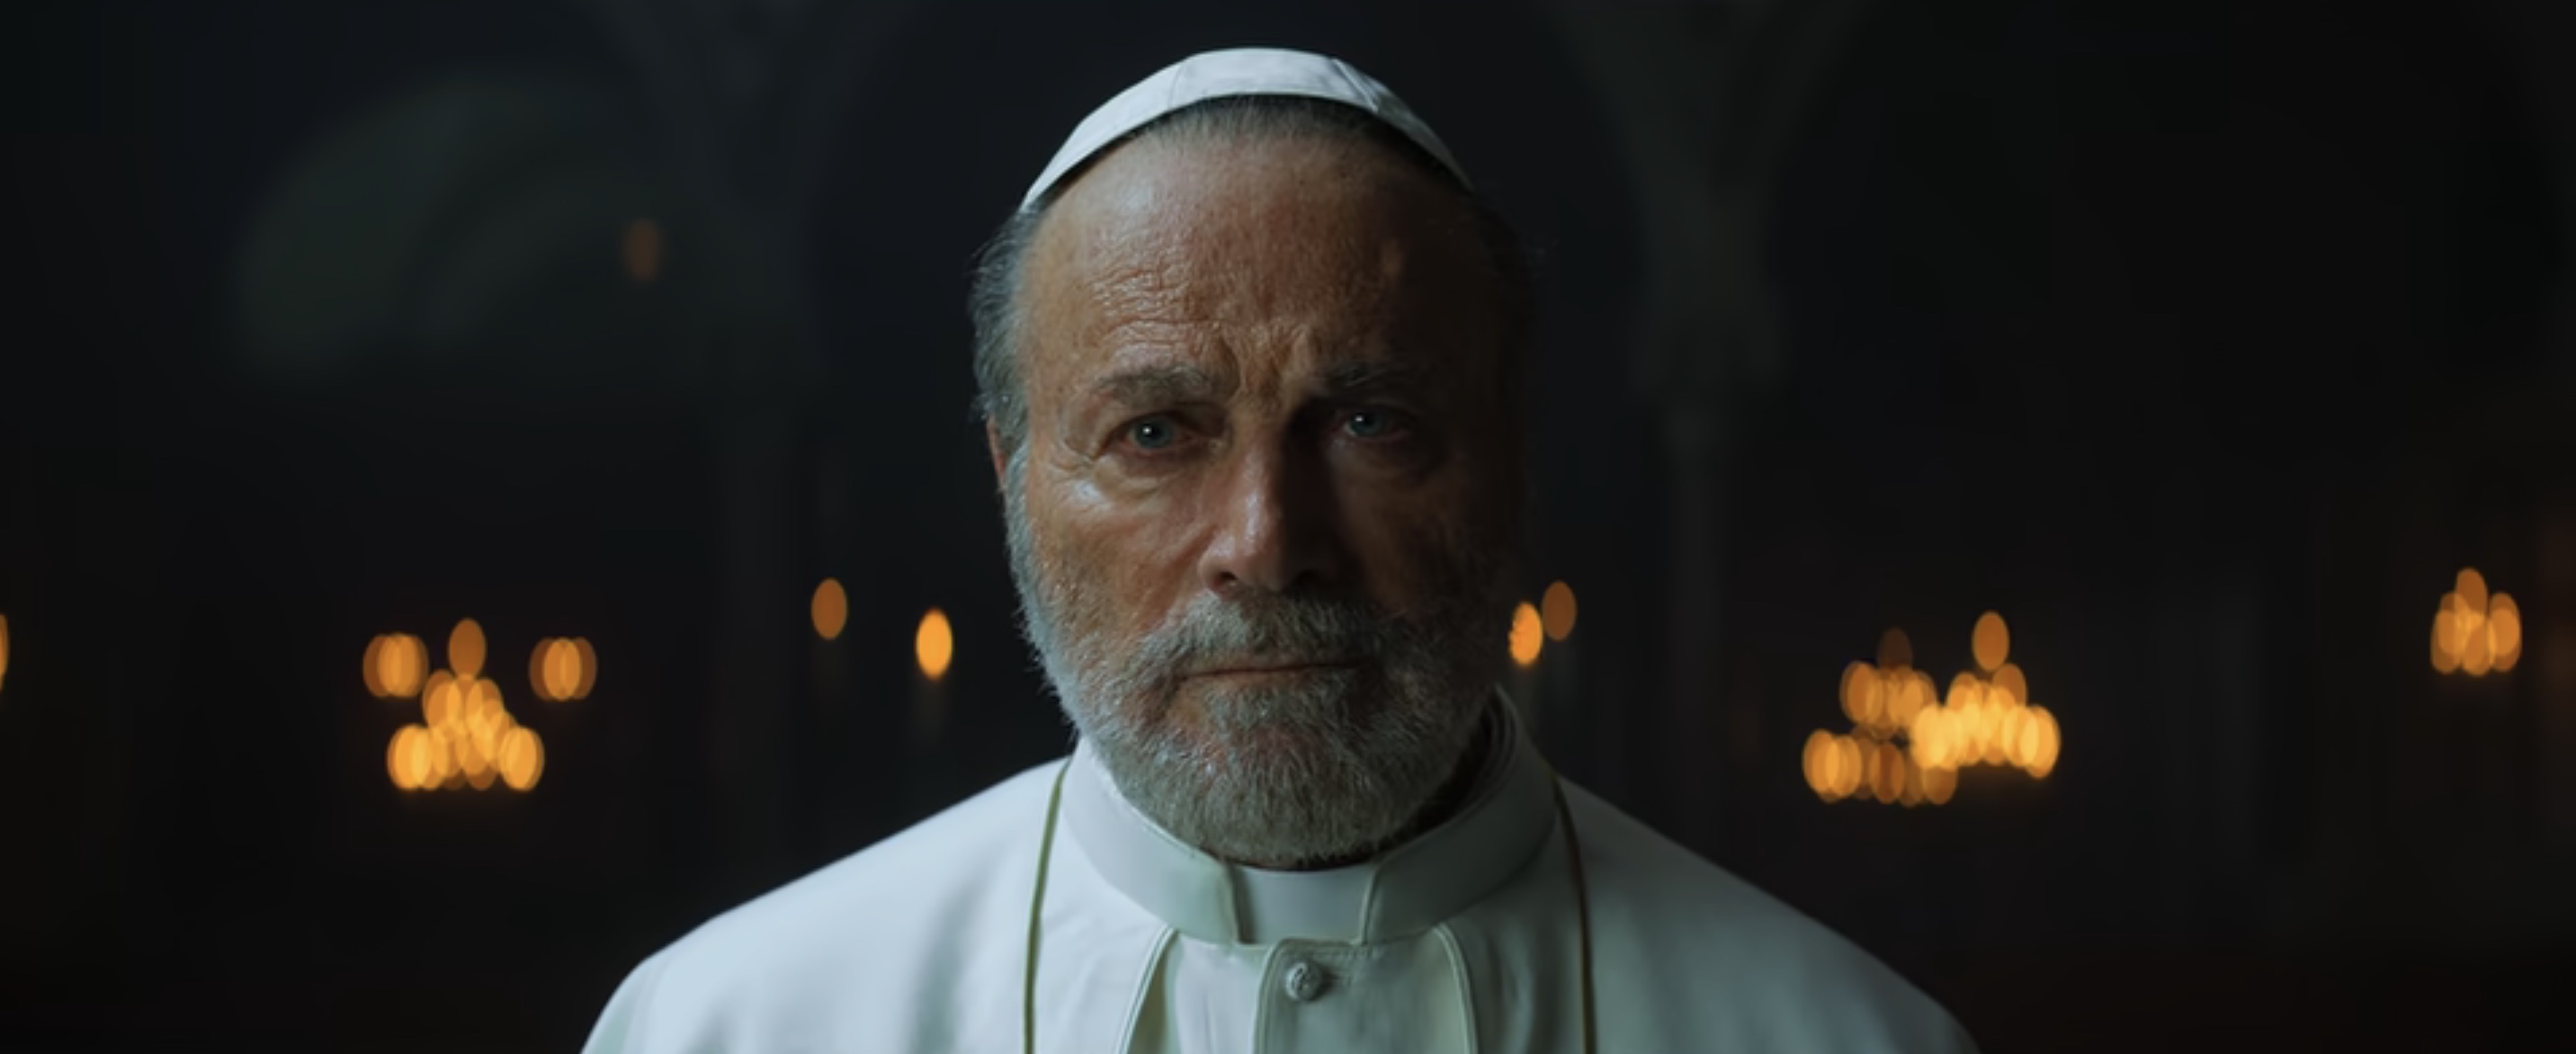 The Pope's Exorcist Cast on Netflix - Franco Nero as The Pope